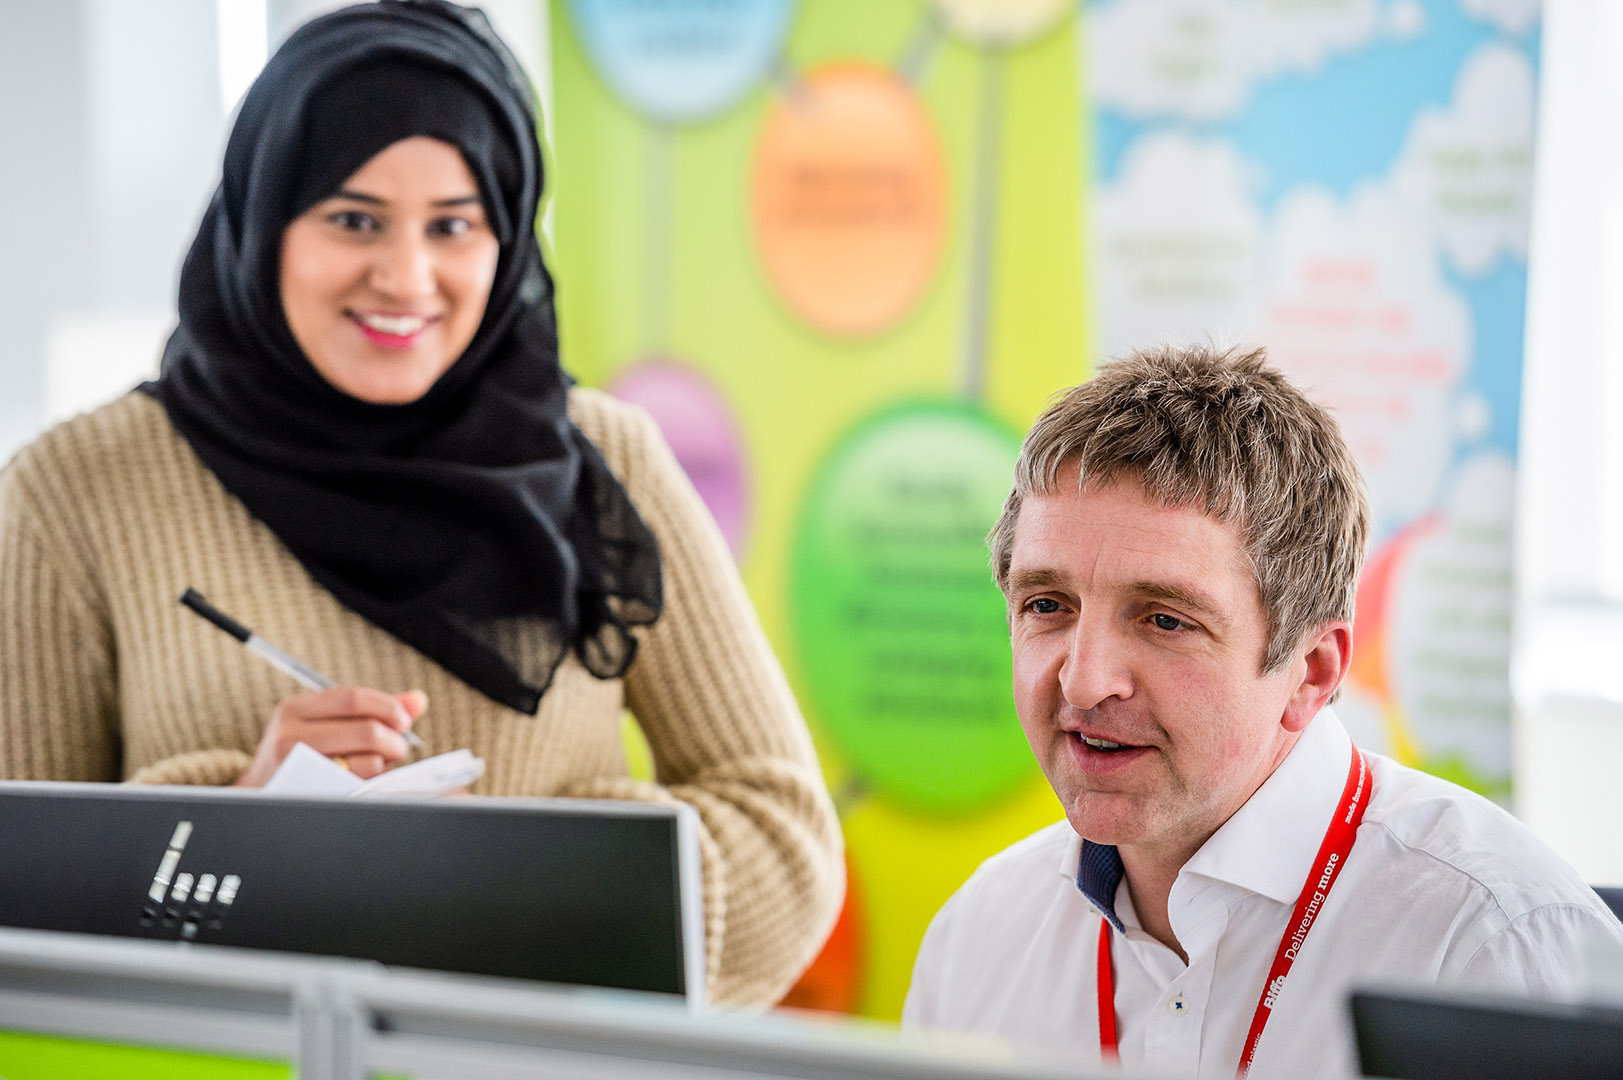 Woman in headscarf in conversation with male colleague looking at screen 